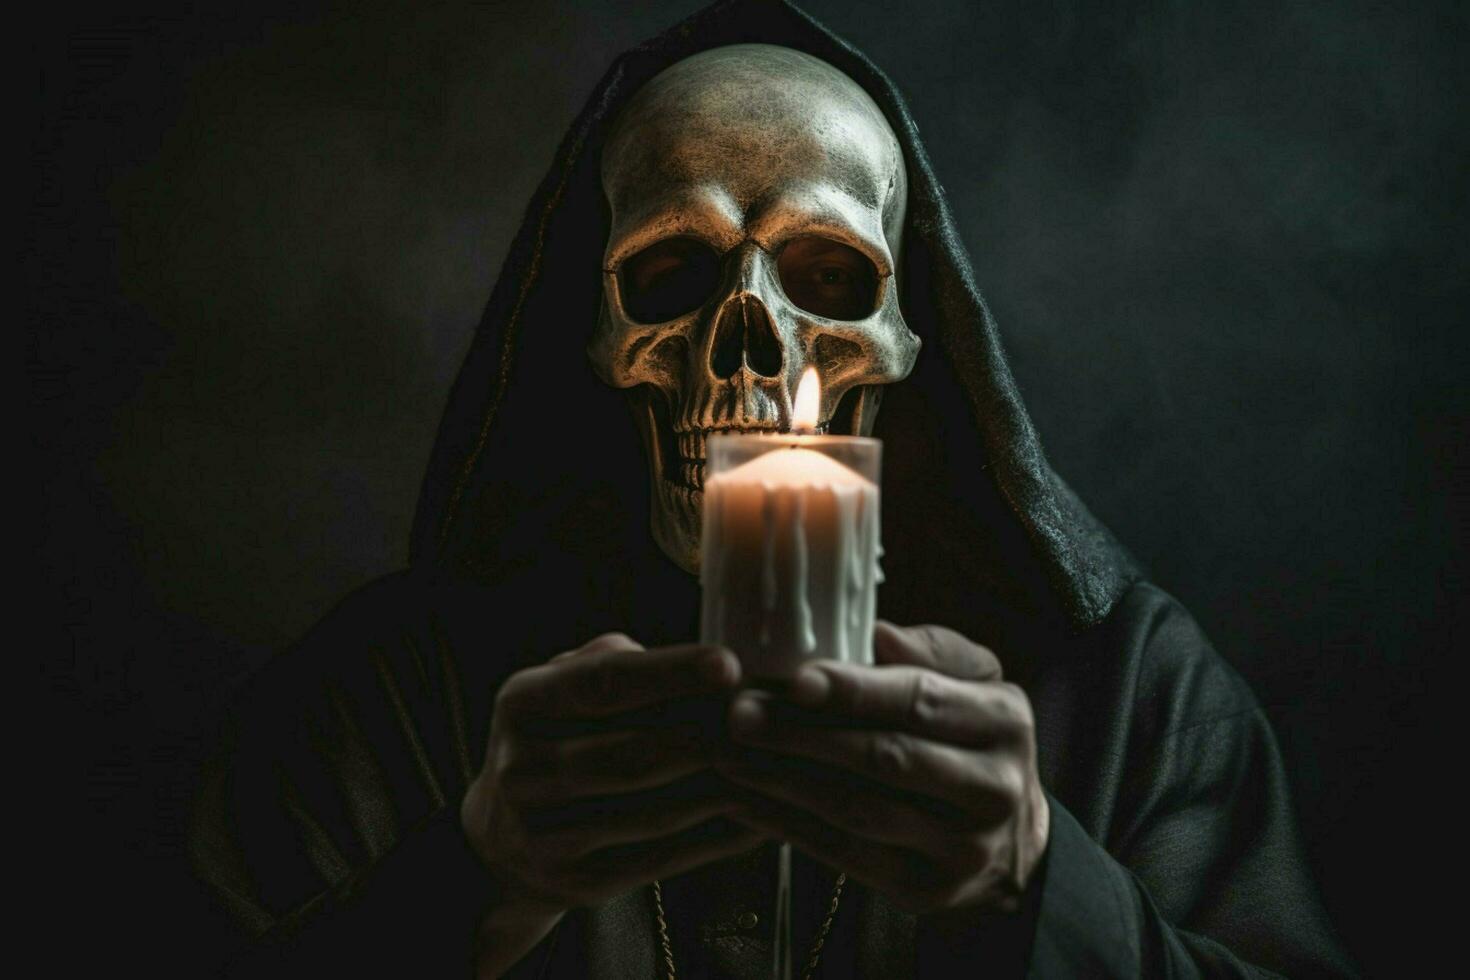 a person with a skull mask and a candle in their ha photo